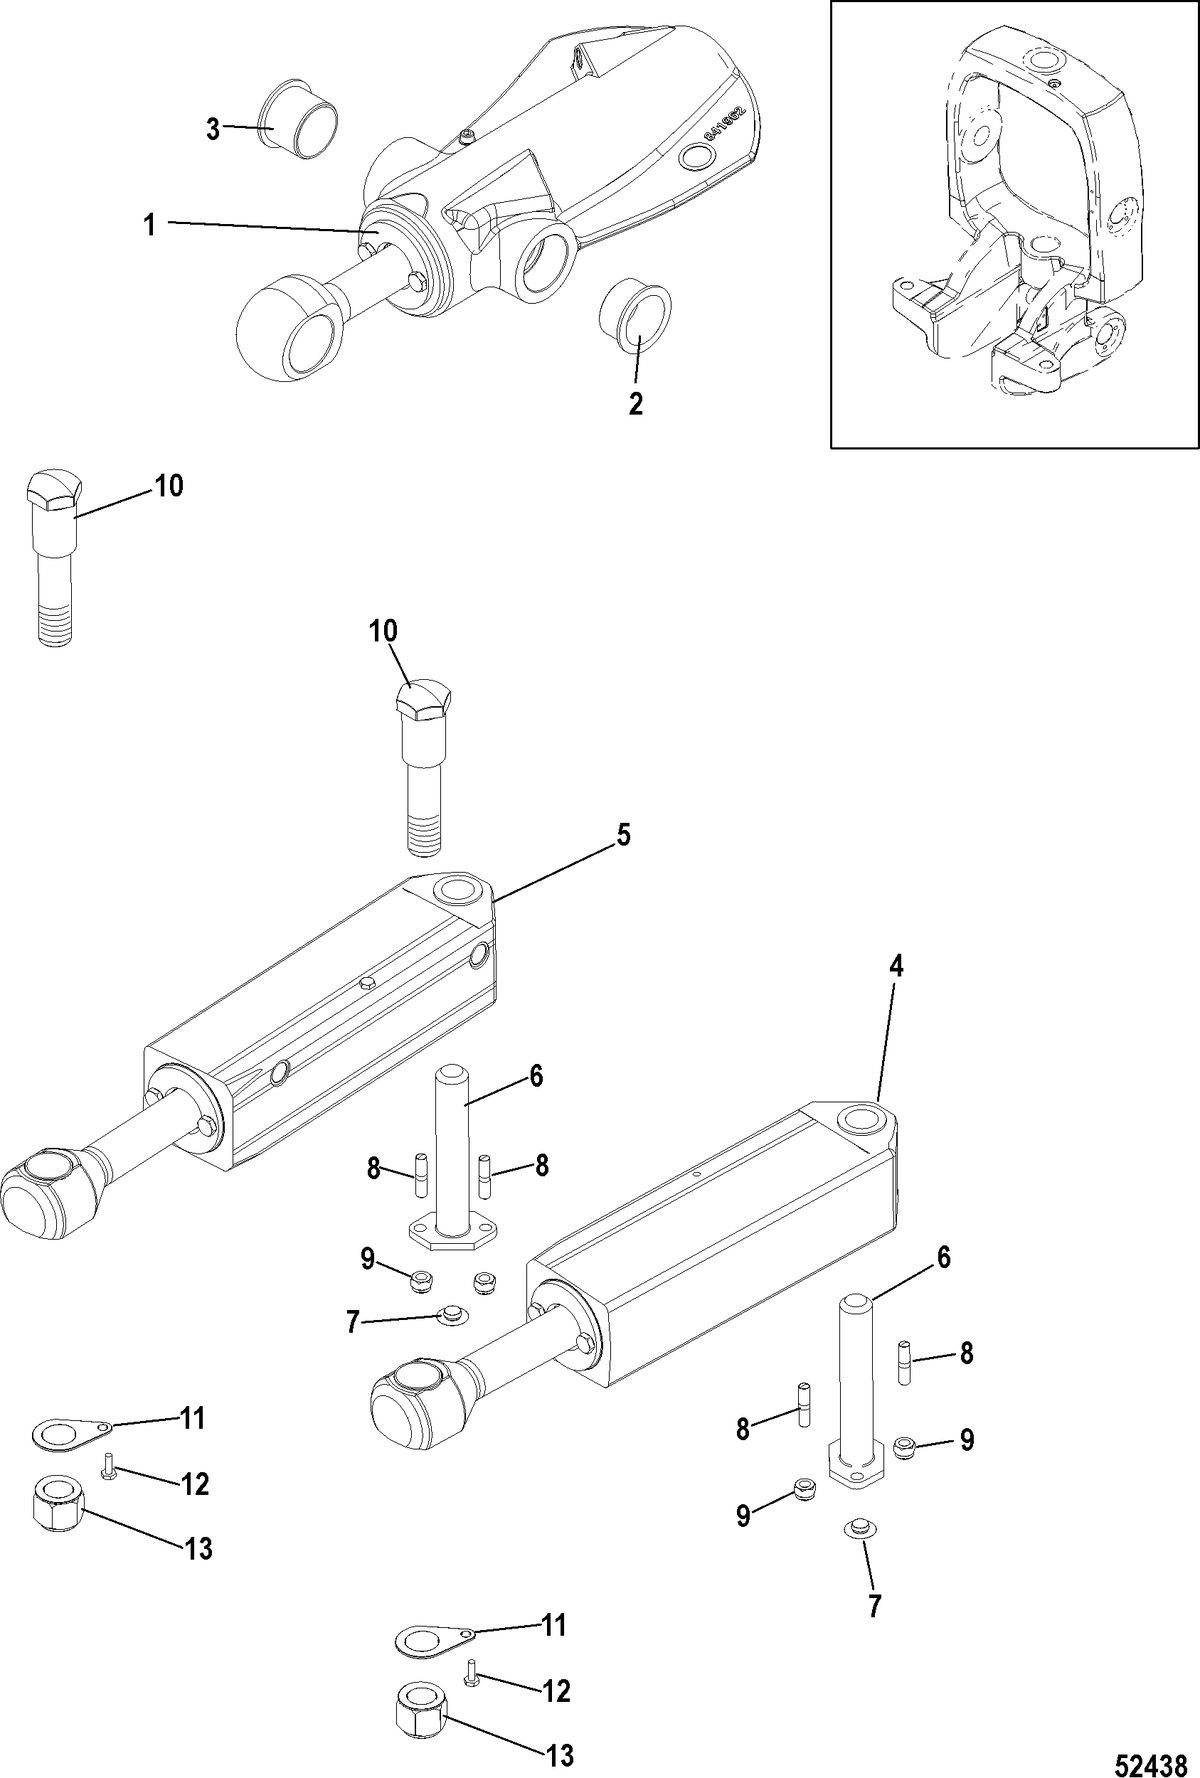 RACE STERNDRIVE M8 DRIVE AND M SERIES TRANSOM Trim and Steering Cylinders